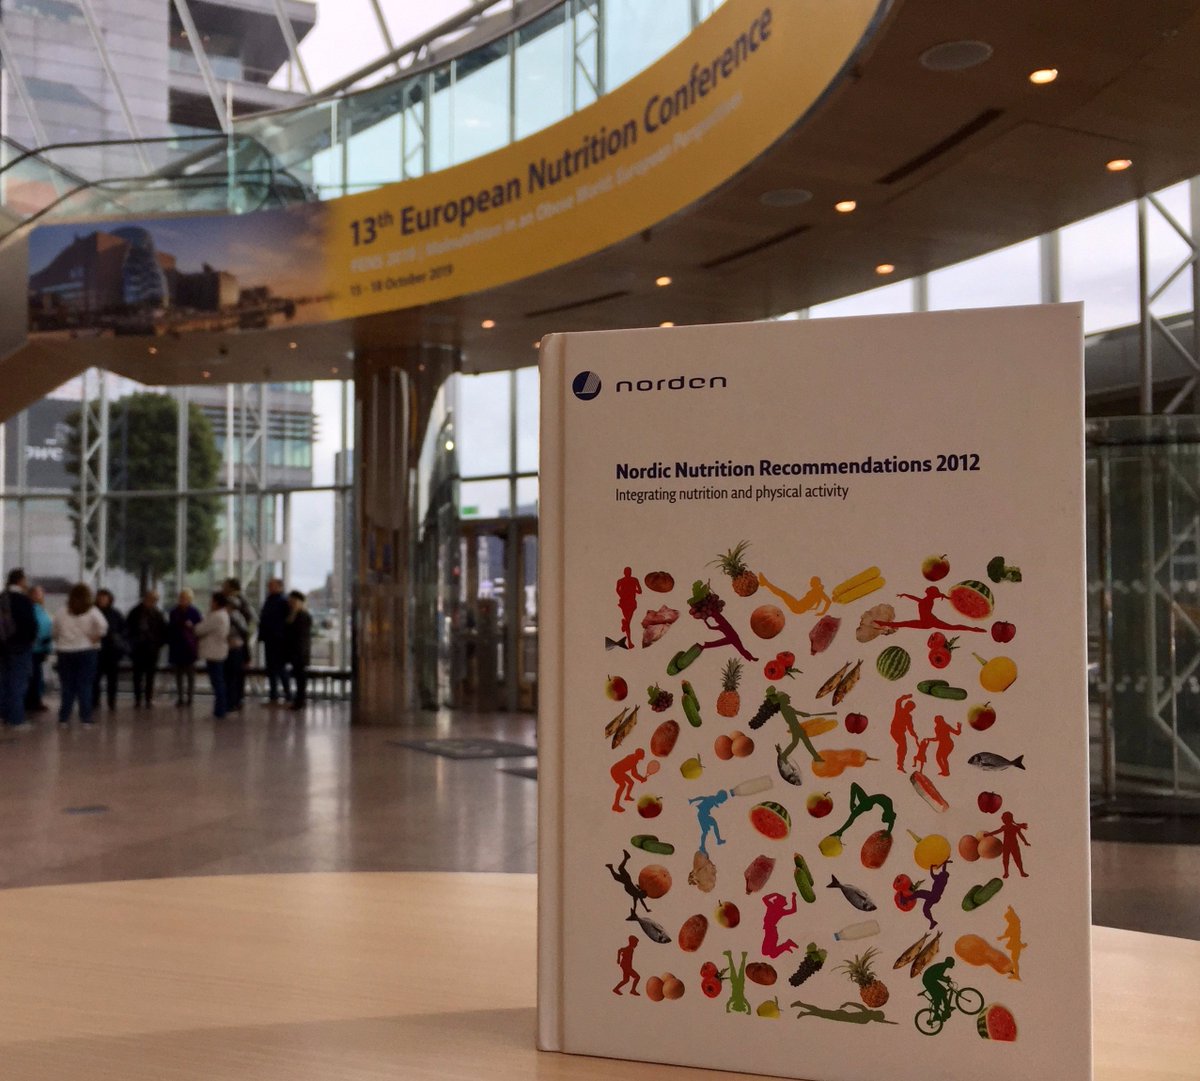 A real heavy weight when it comes to #nutrition evidence. Felt good to pack 30 years of Nordic cooperation on nutrition for #FENS2019.

Interested in #NordicNutrition Recommendations? Don't miss Wednesday session: 'The Way to Nordic #SustainableNutrition' app.oxfordabstracts.com/events/696/pro…